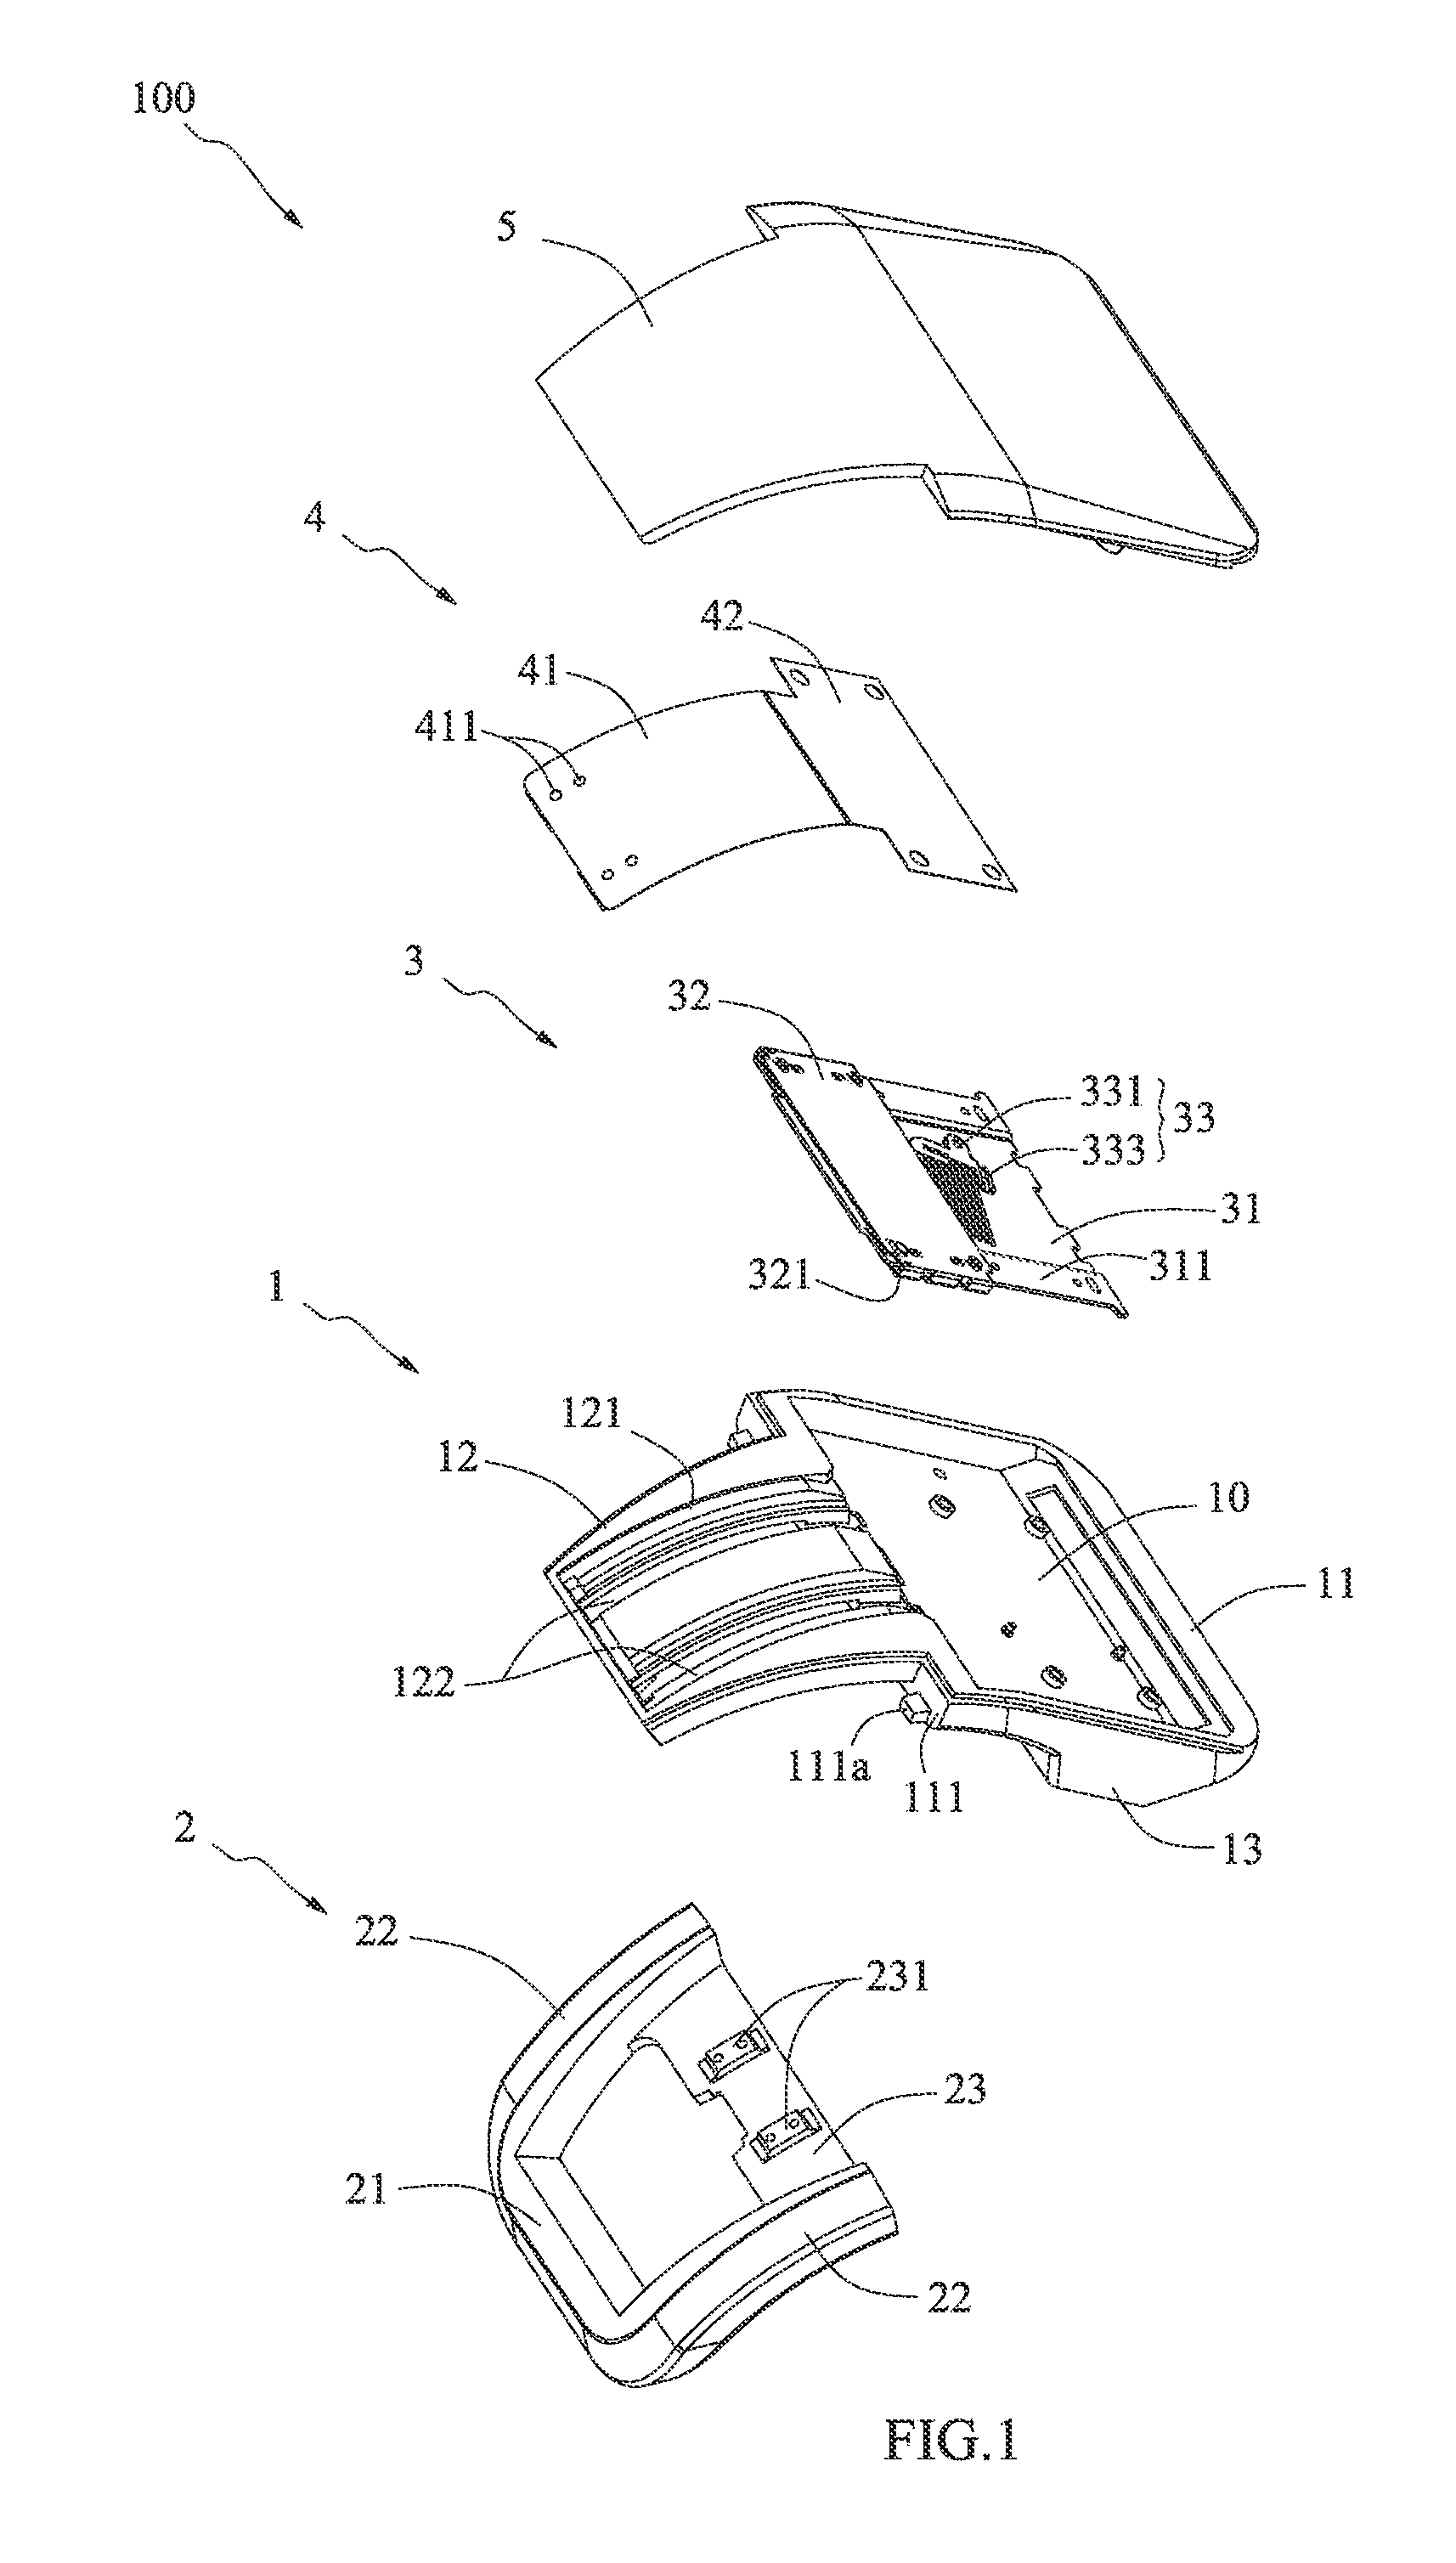 Mouse structure with retracting function